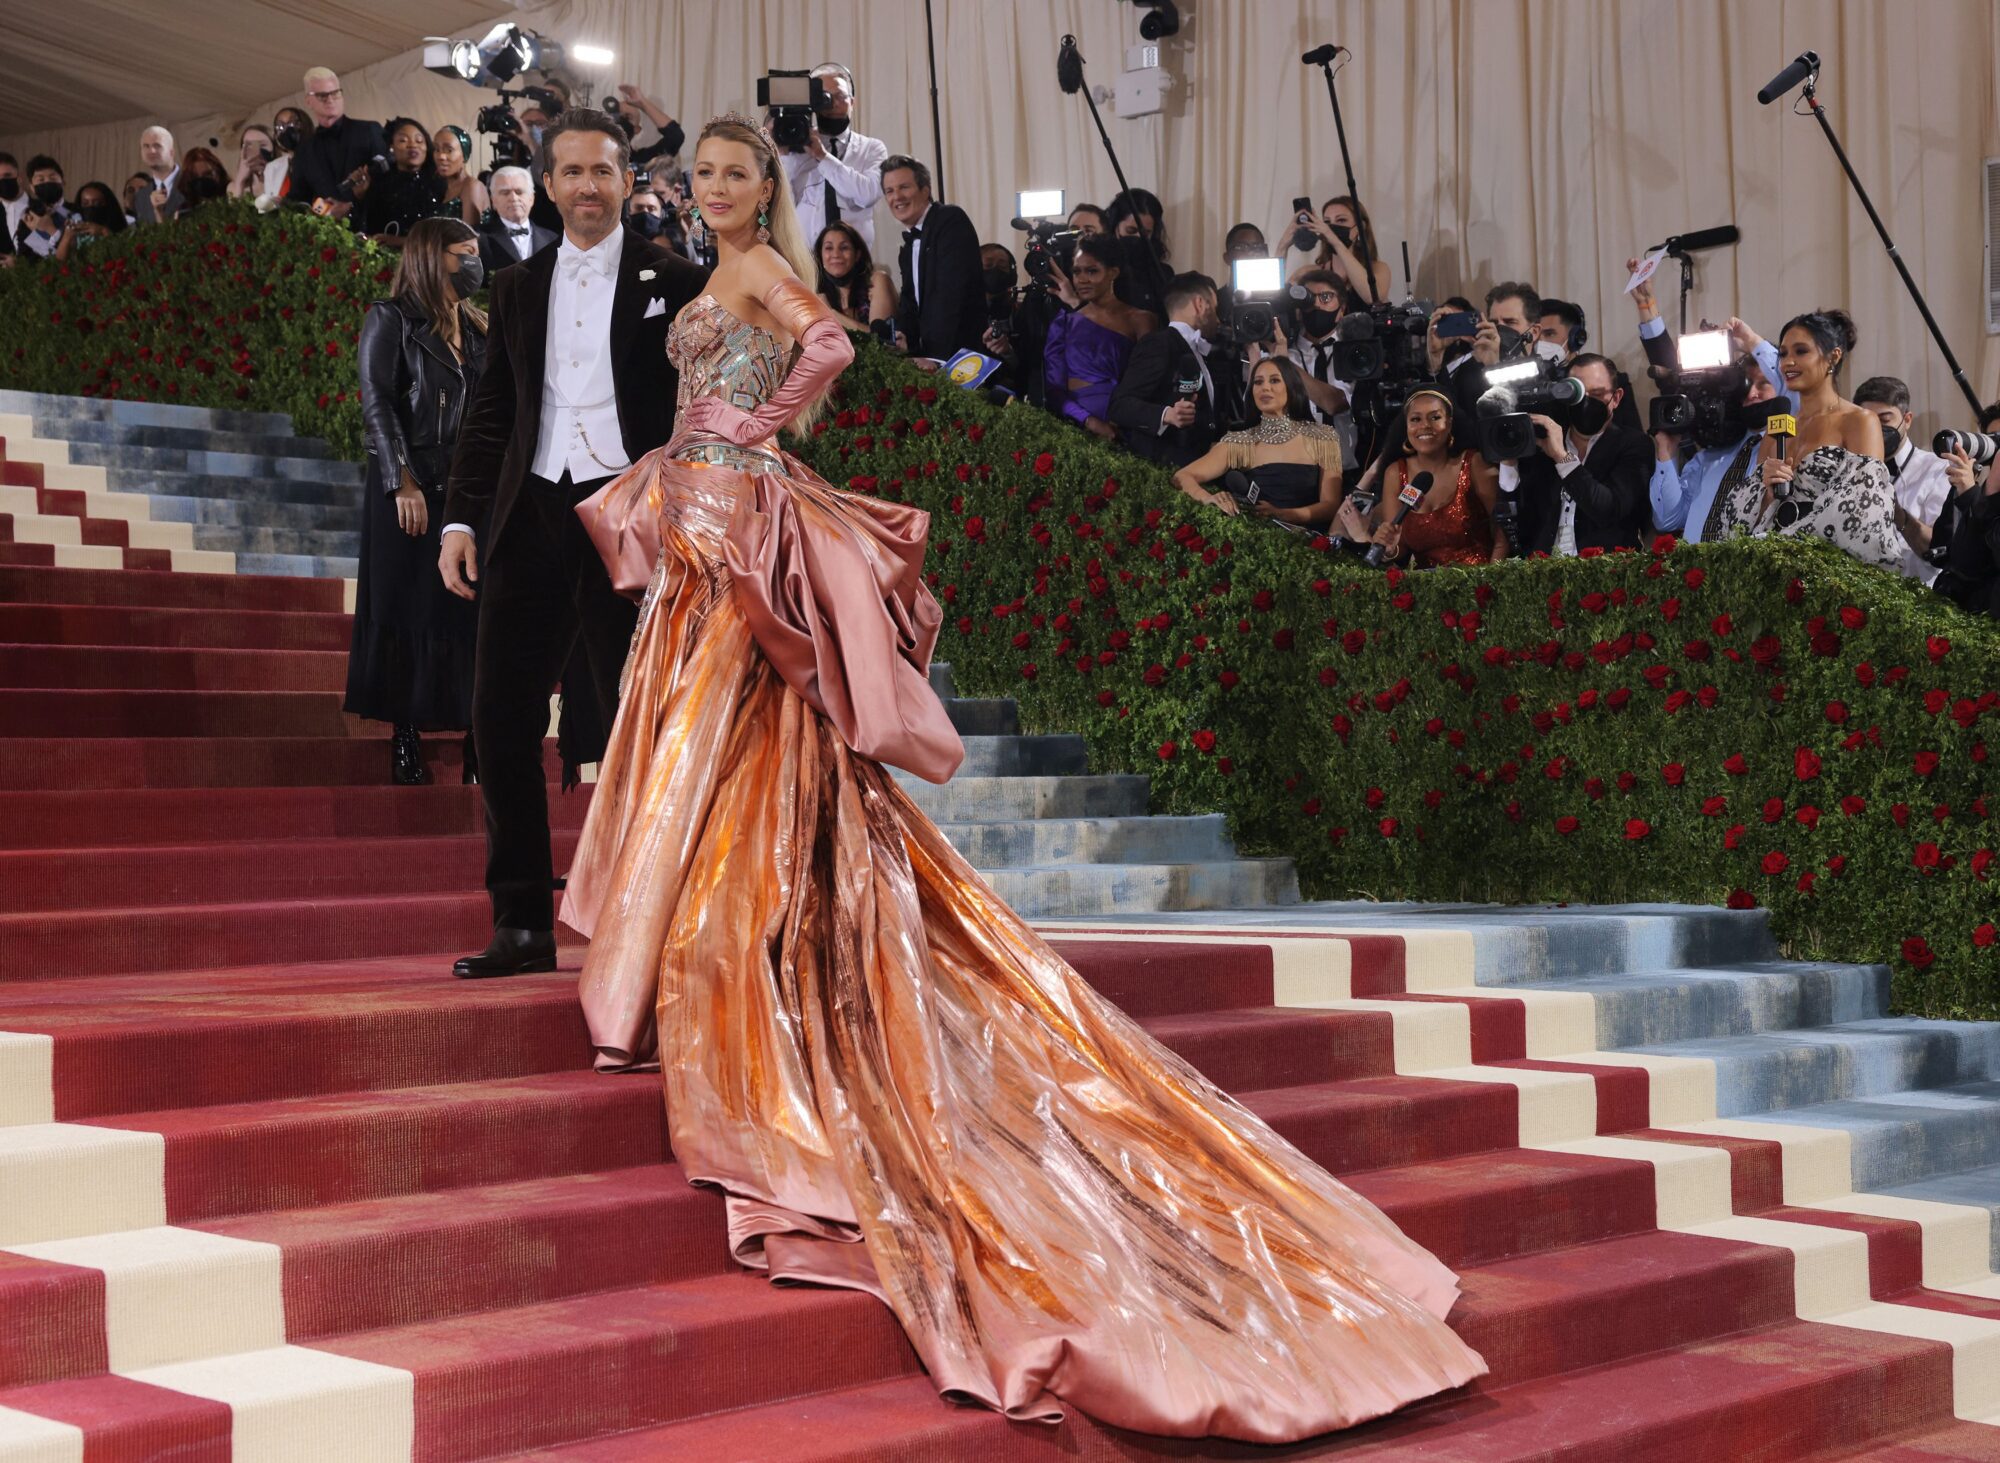 Blake Lively and Ryan Reynolds arrive at the In America: An Anthology of Fashion themed Met Gala at the Metropolitan Museum of Art in New York City, New York, U.S., May 2, 2022. REUTERS/Andrew Kelly